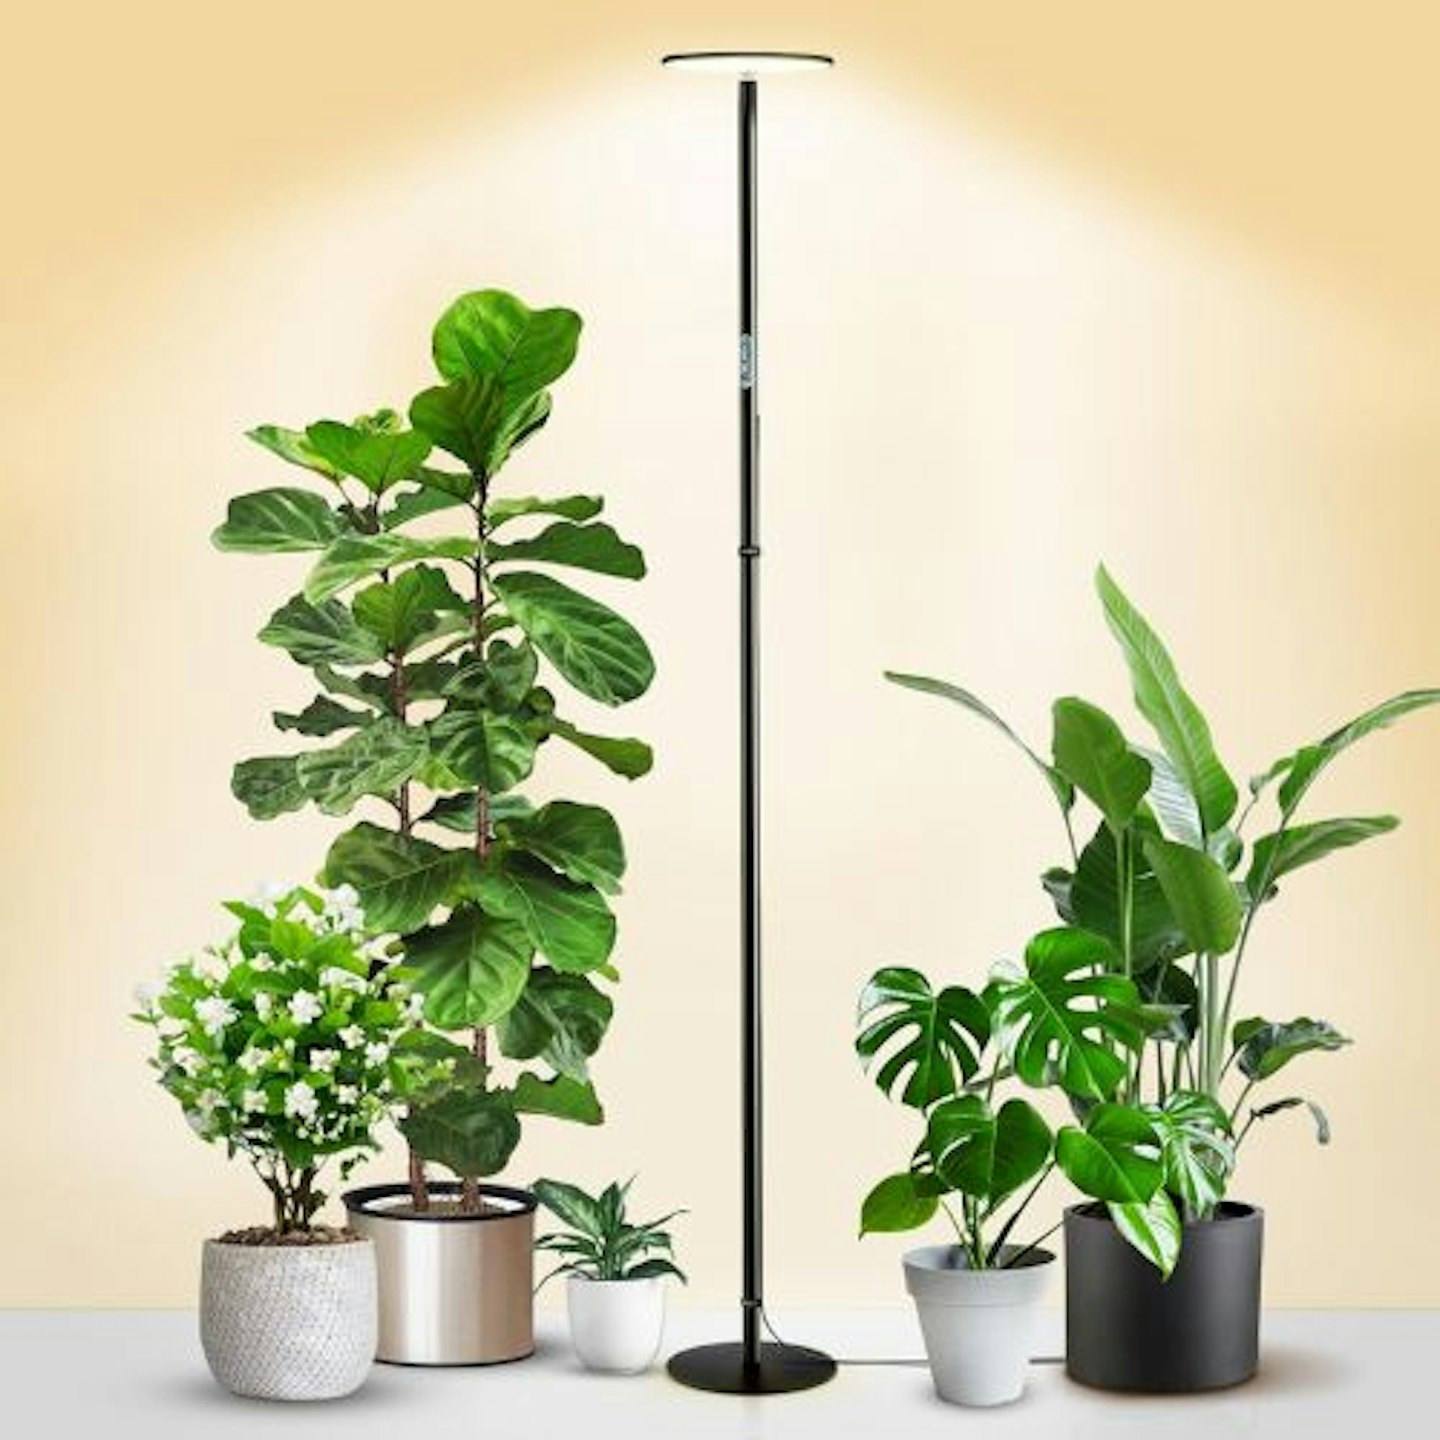 chiphy Grow Light for Indoor Plants, All Metal Floor Plant Light, 40W Dimmable Grow Light, Natural Sunlight, 69" Heights Adjustable Tall Lamp for...